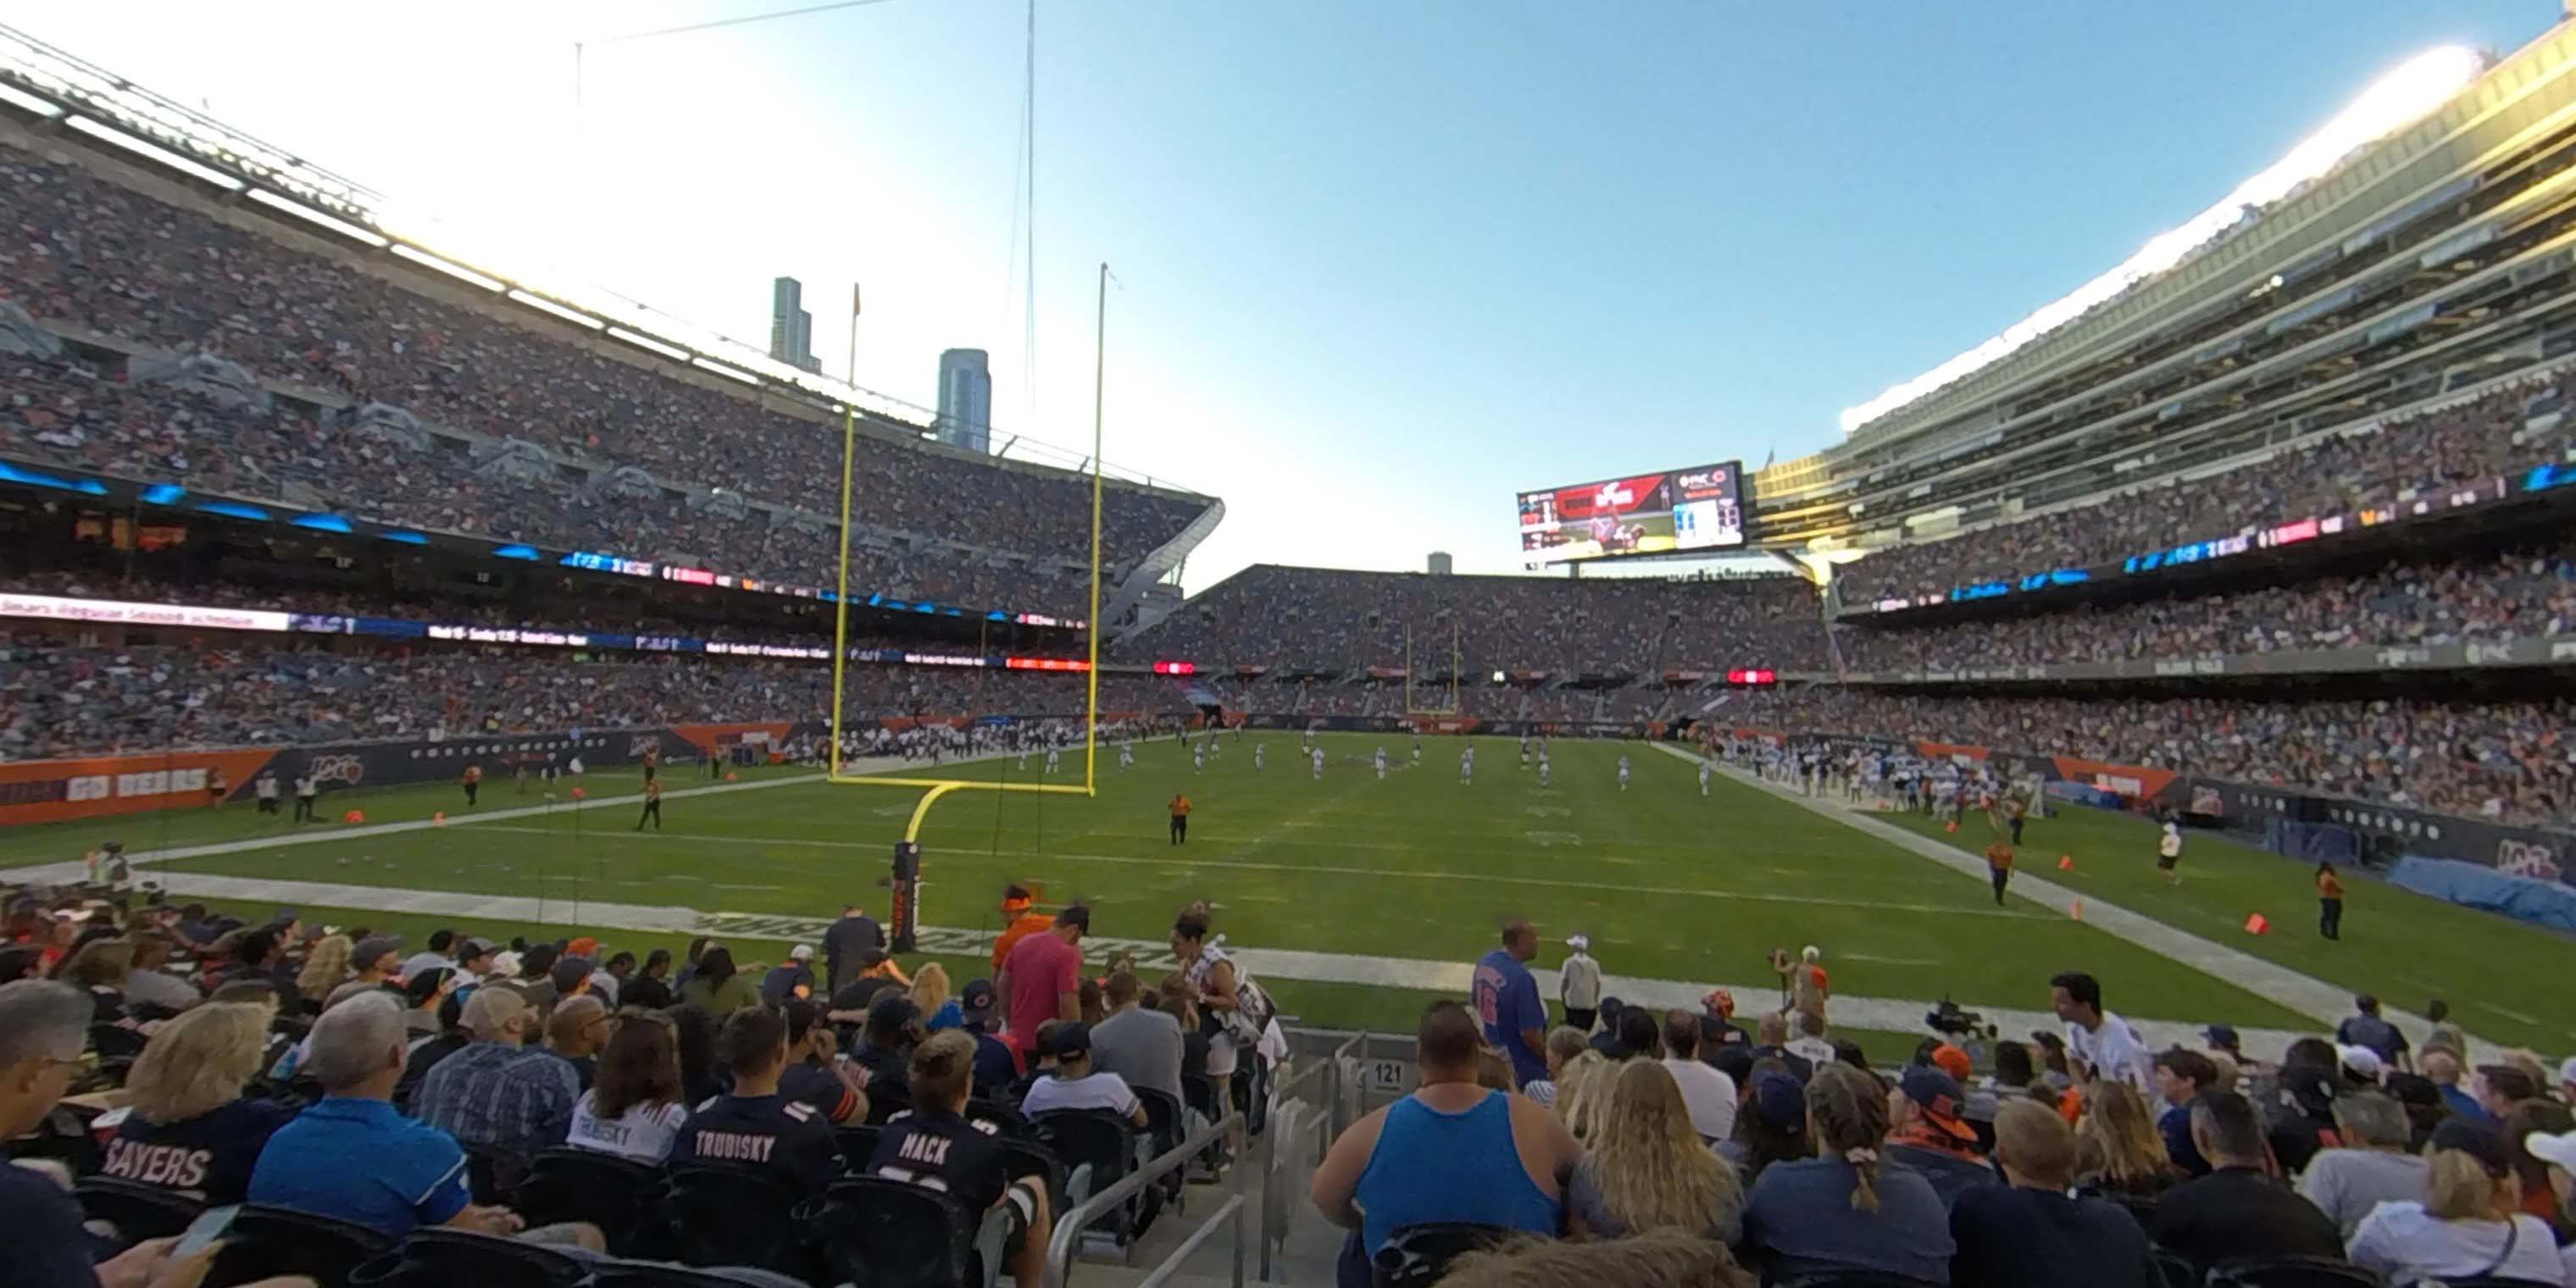 section 121 panoramic seat view  for football - soldier field